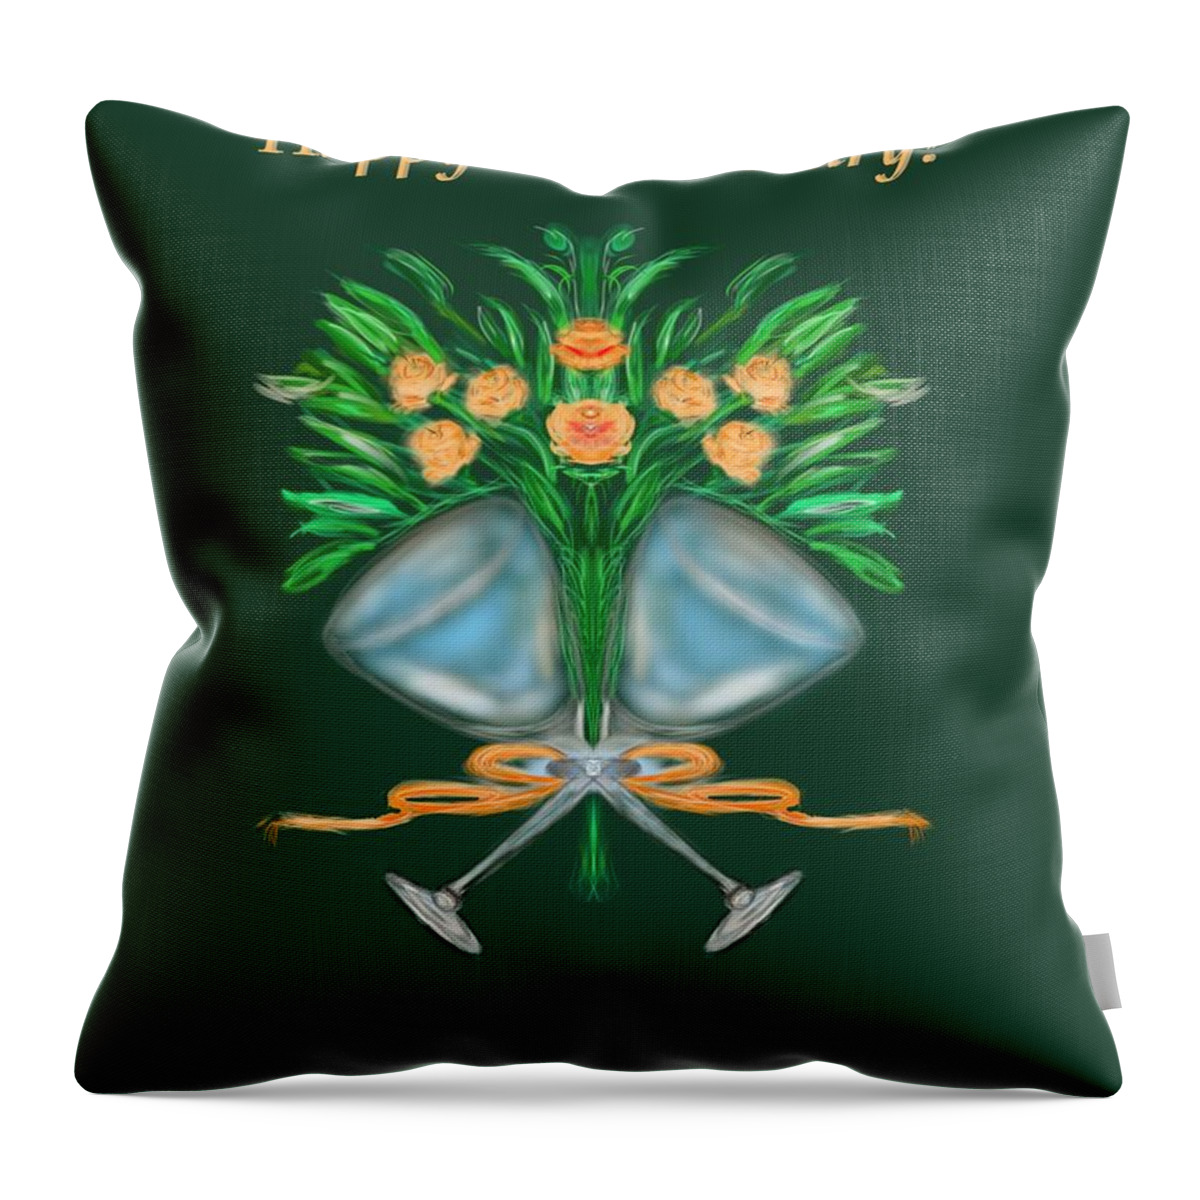 Greeting Card Throw Pillow featuring the digital art Anniversary Bouquet by Christine Fournier